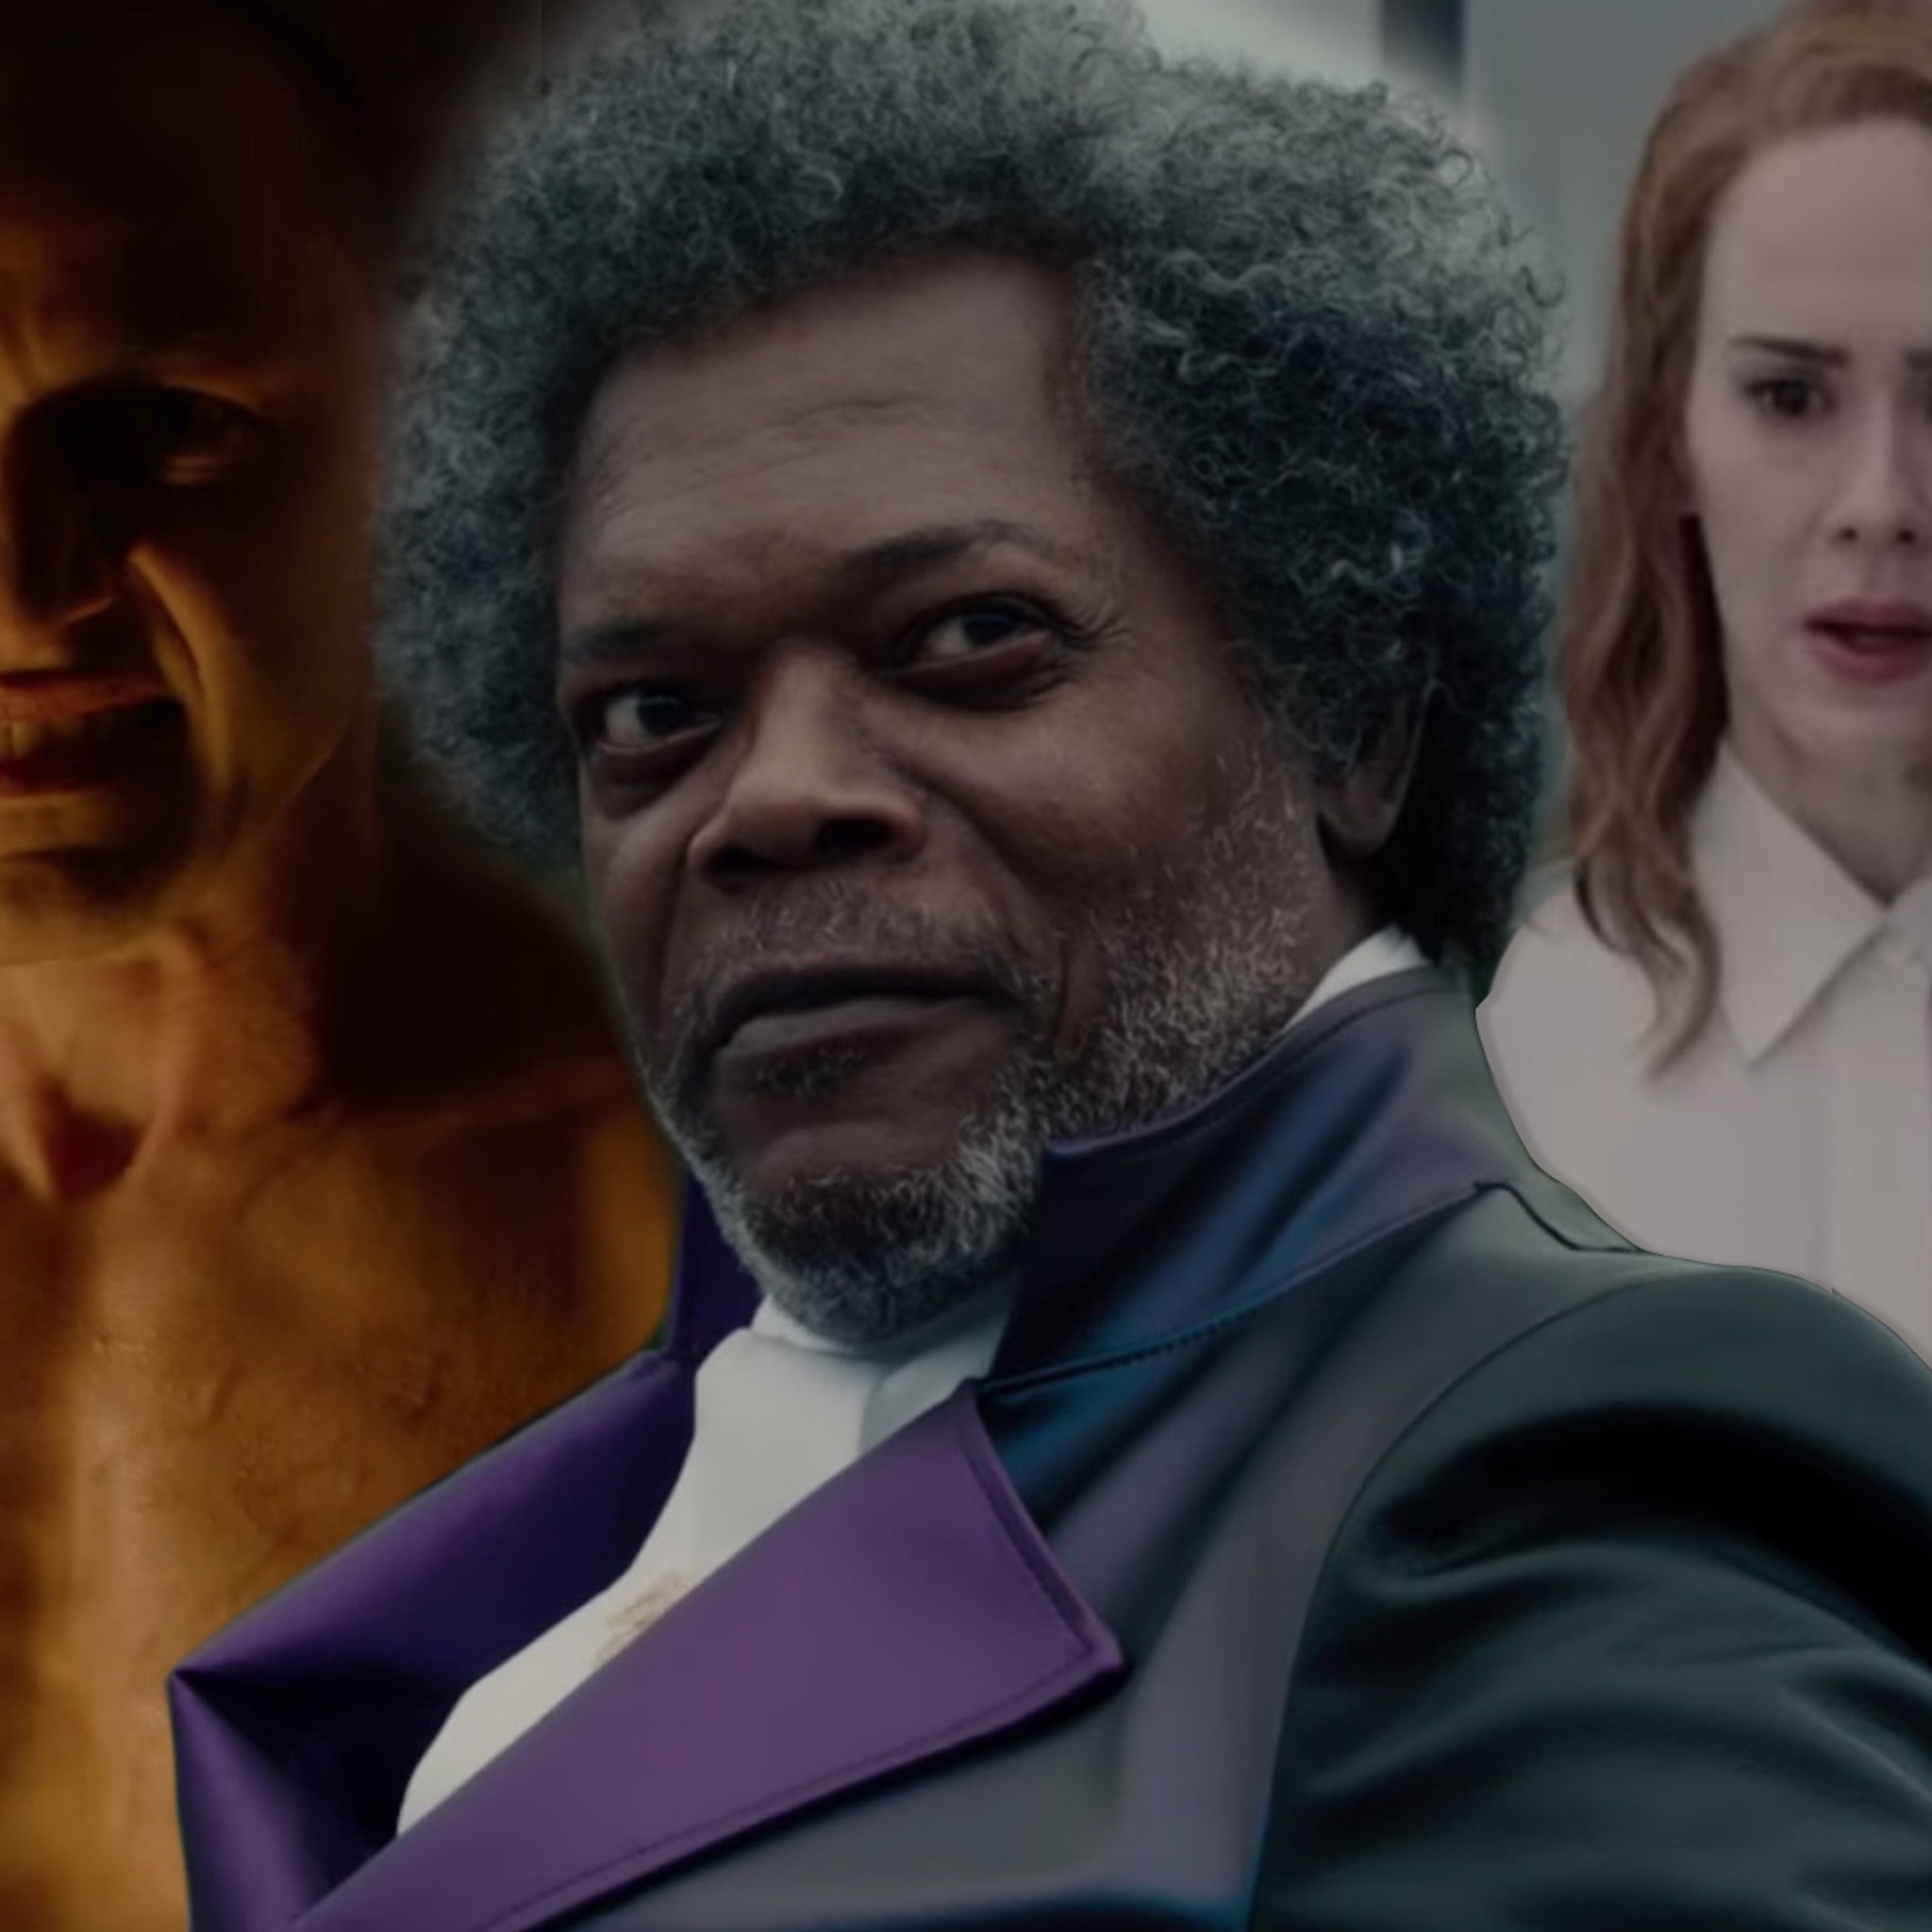 sladre støbt Final New 'Glass' Trailer Unleashes the Beast as Sarah Paulson Blows It for  Humanity